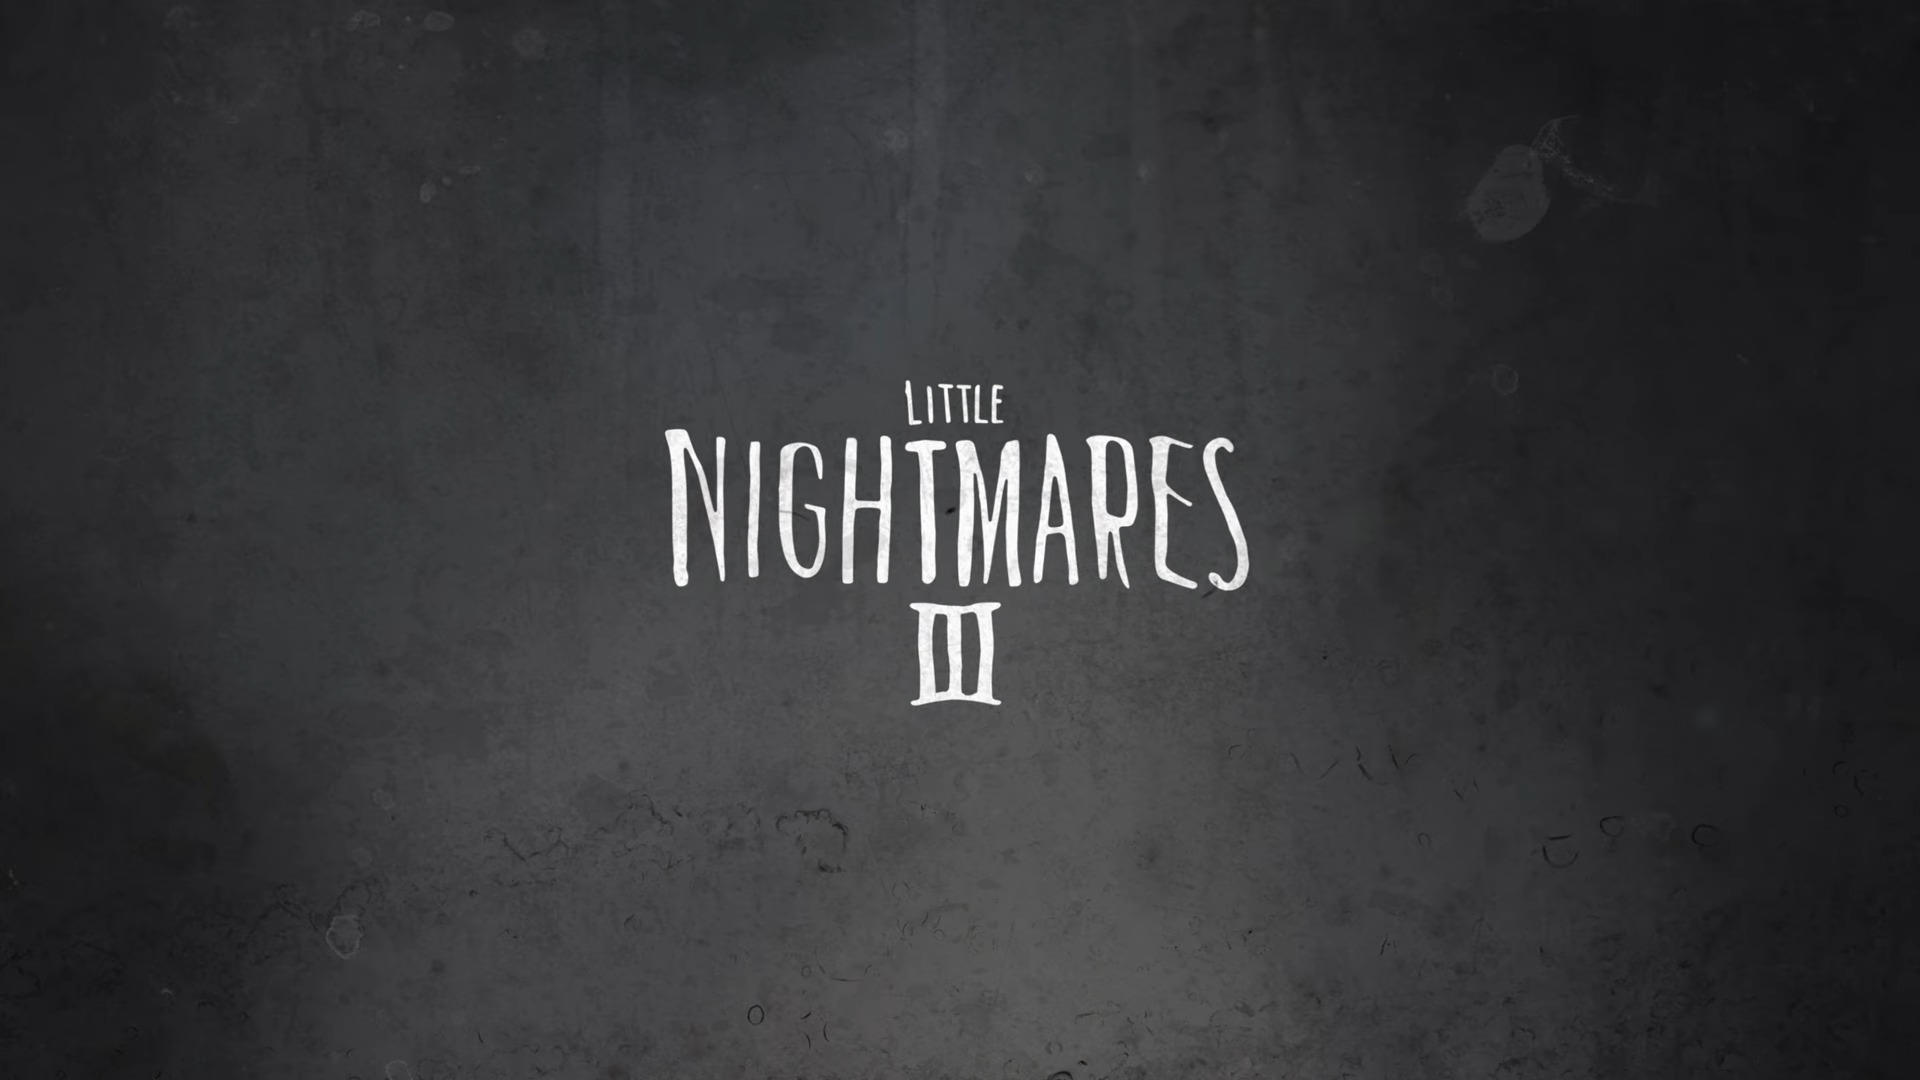 Little Nightmares 3 video shows 18 minutes of co-op gameplay